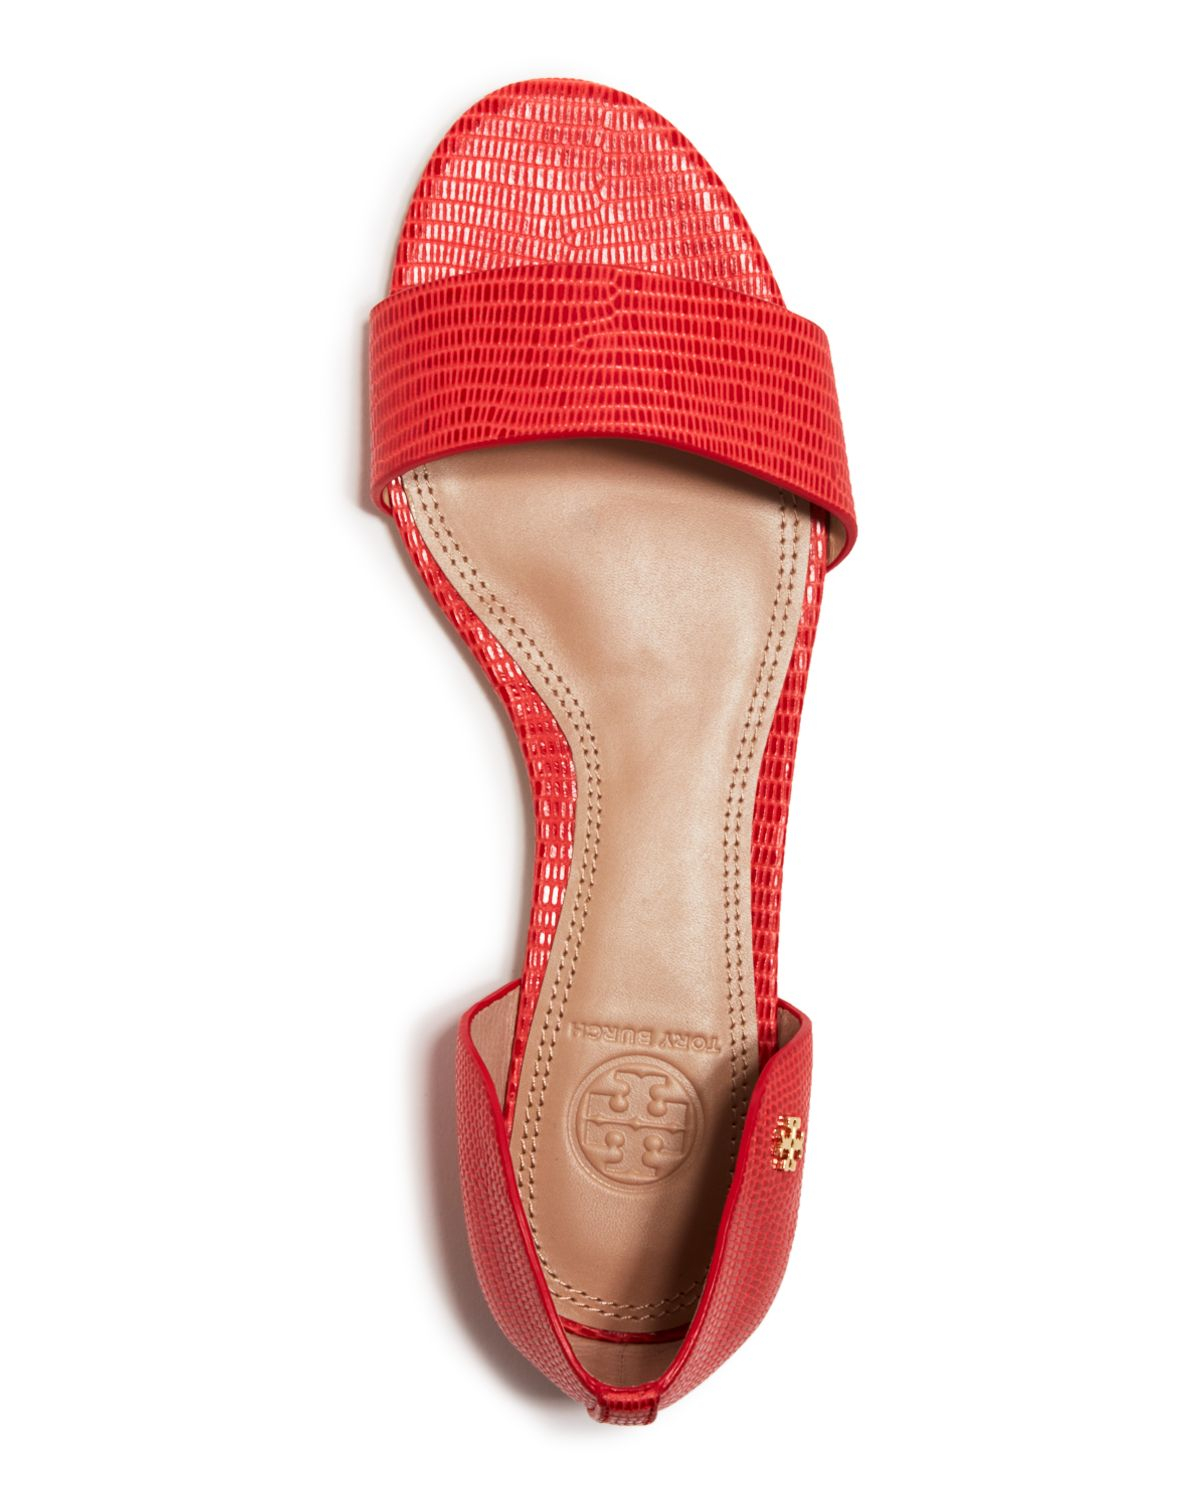 Tory Burch Open Toe D'Orsay Flats - Savannah in Red - Lyst